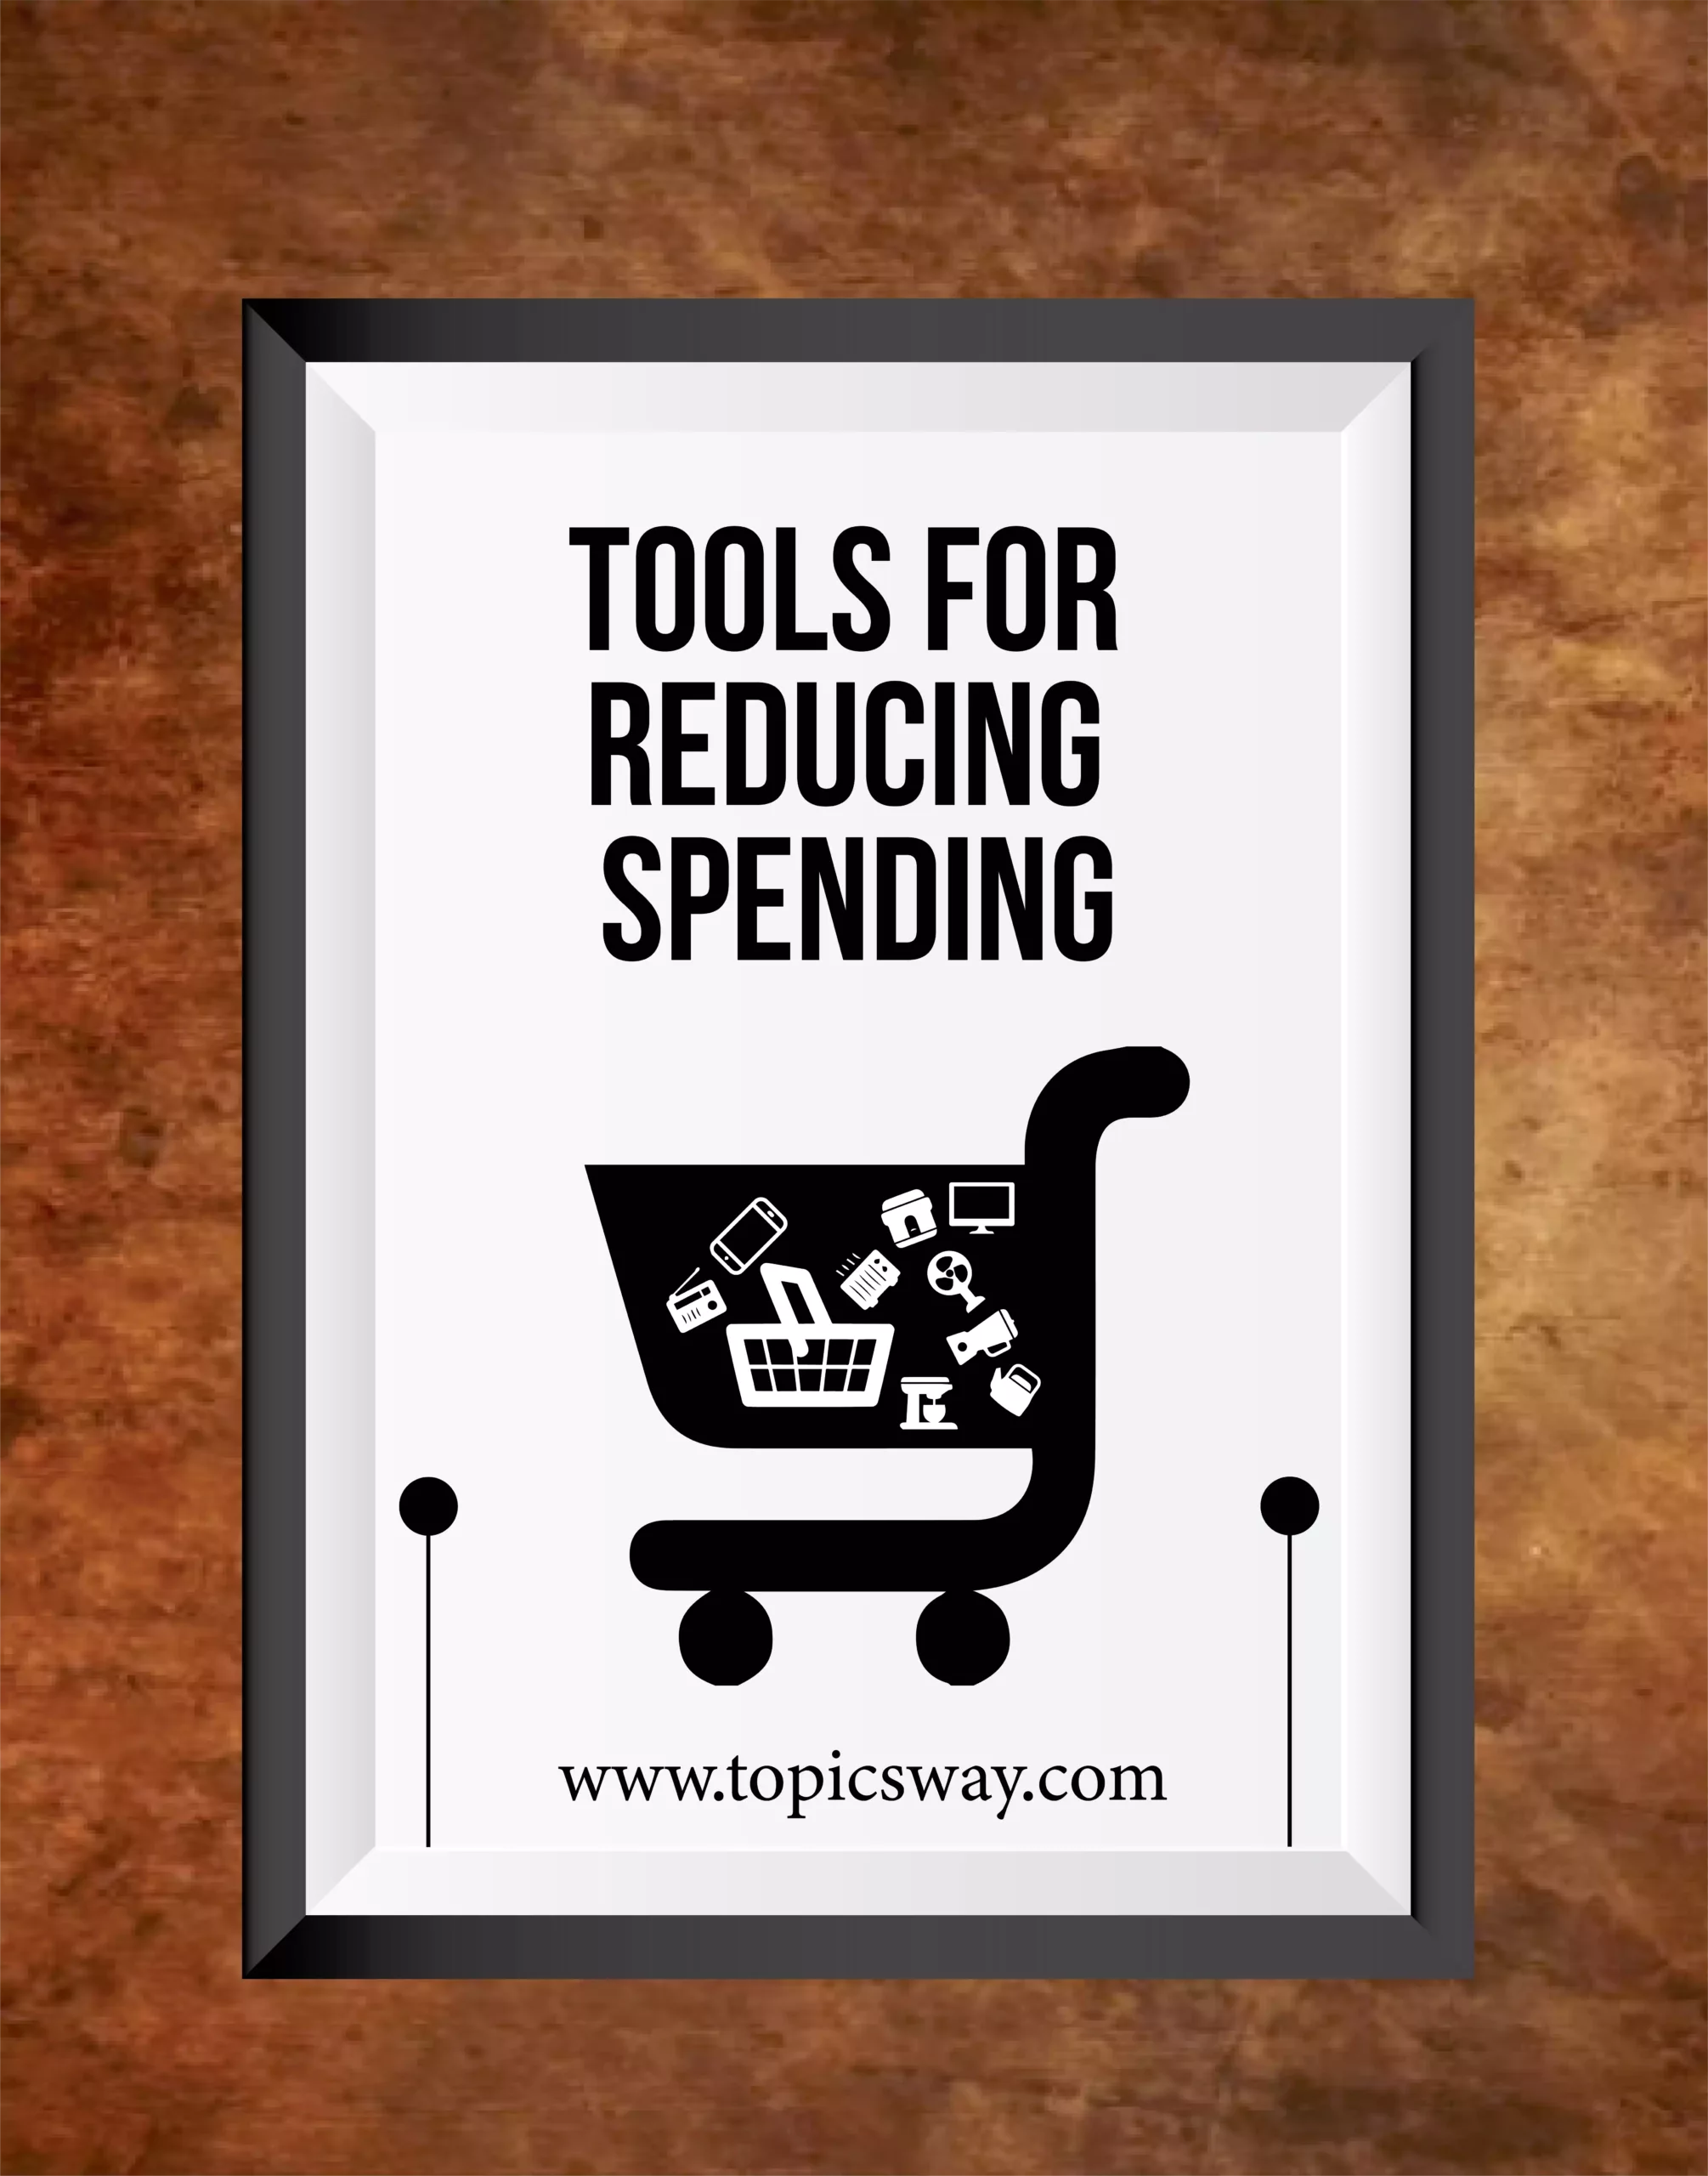 Tools for Reducing Spending